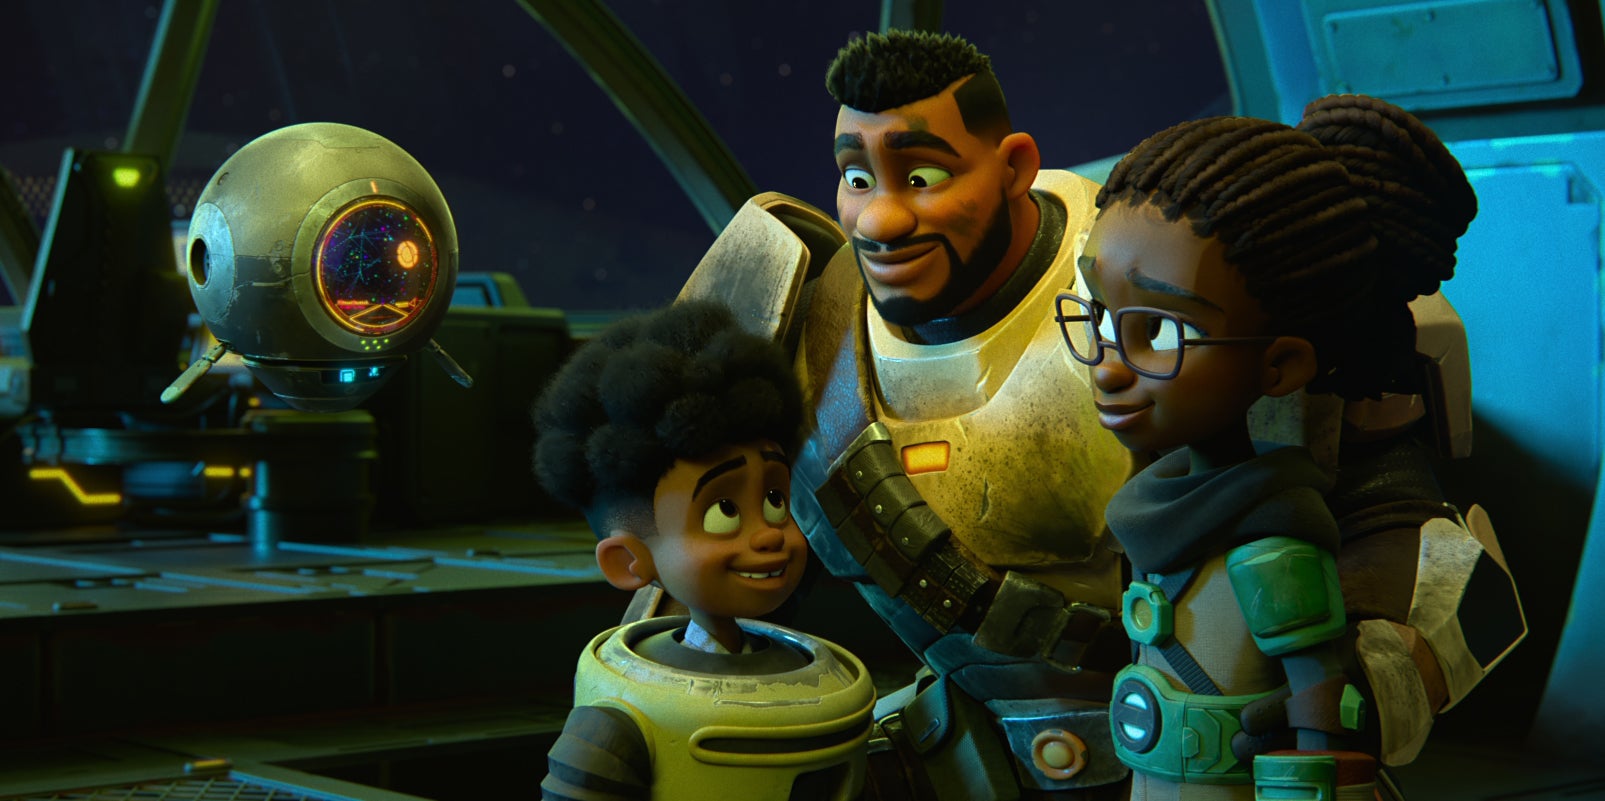 Netflix Releases Trailer For New Animated Series ‘My Dad the Bounty Hunter’